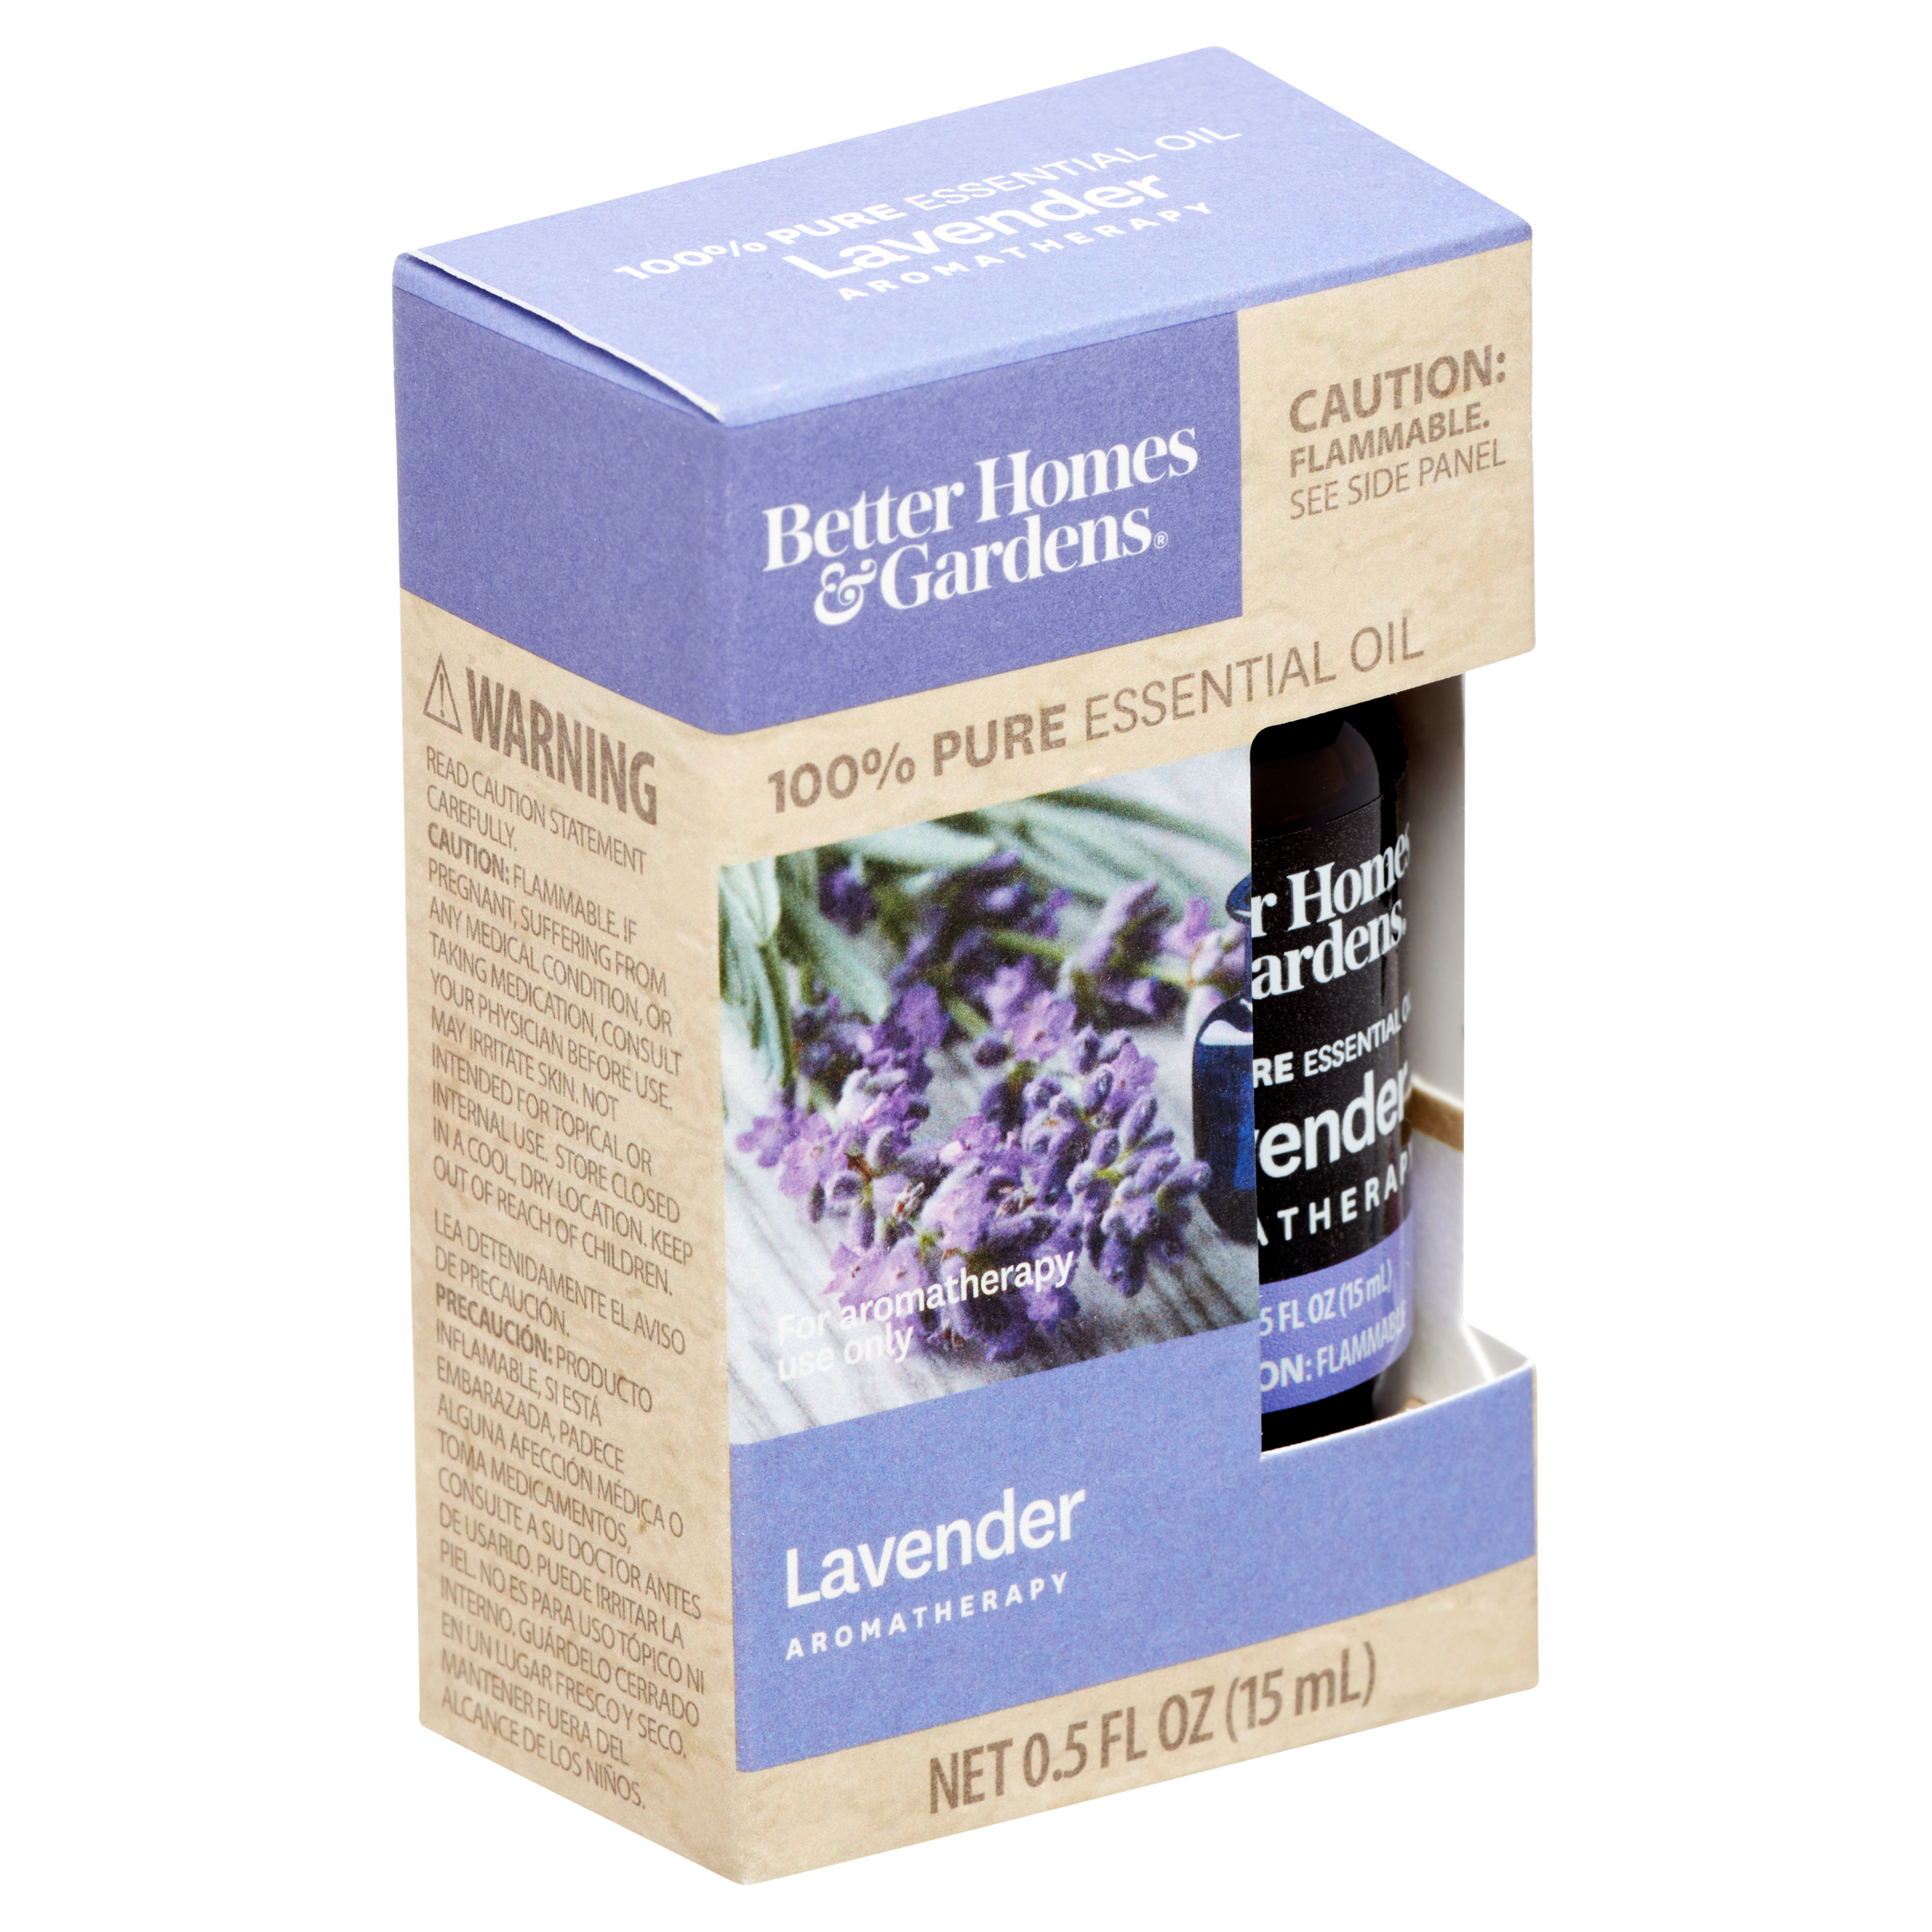 Better Homes & Gardens 15 mL 100% Pure Lavender Essential Oil - image 1 of 13